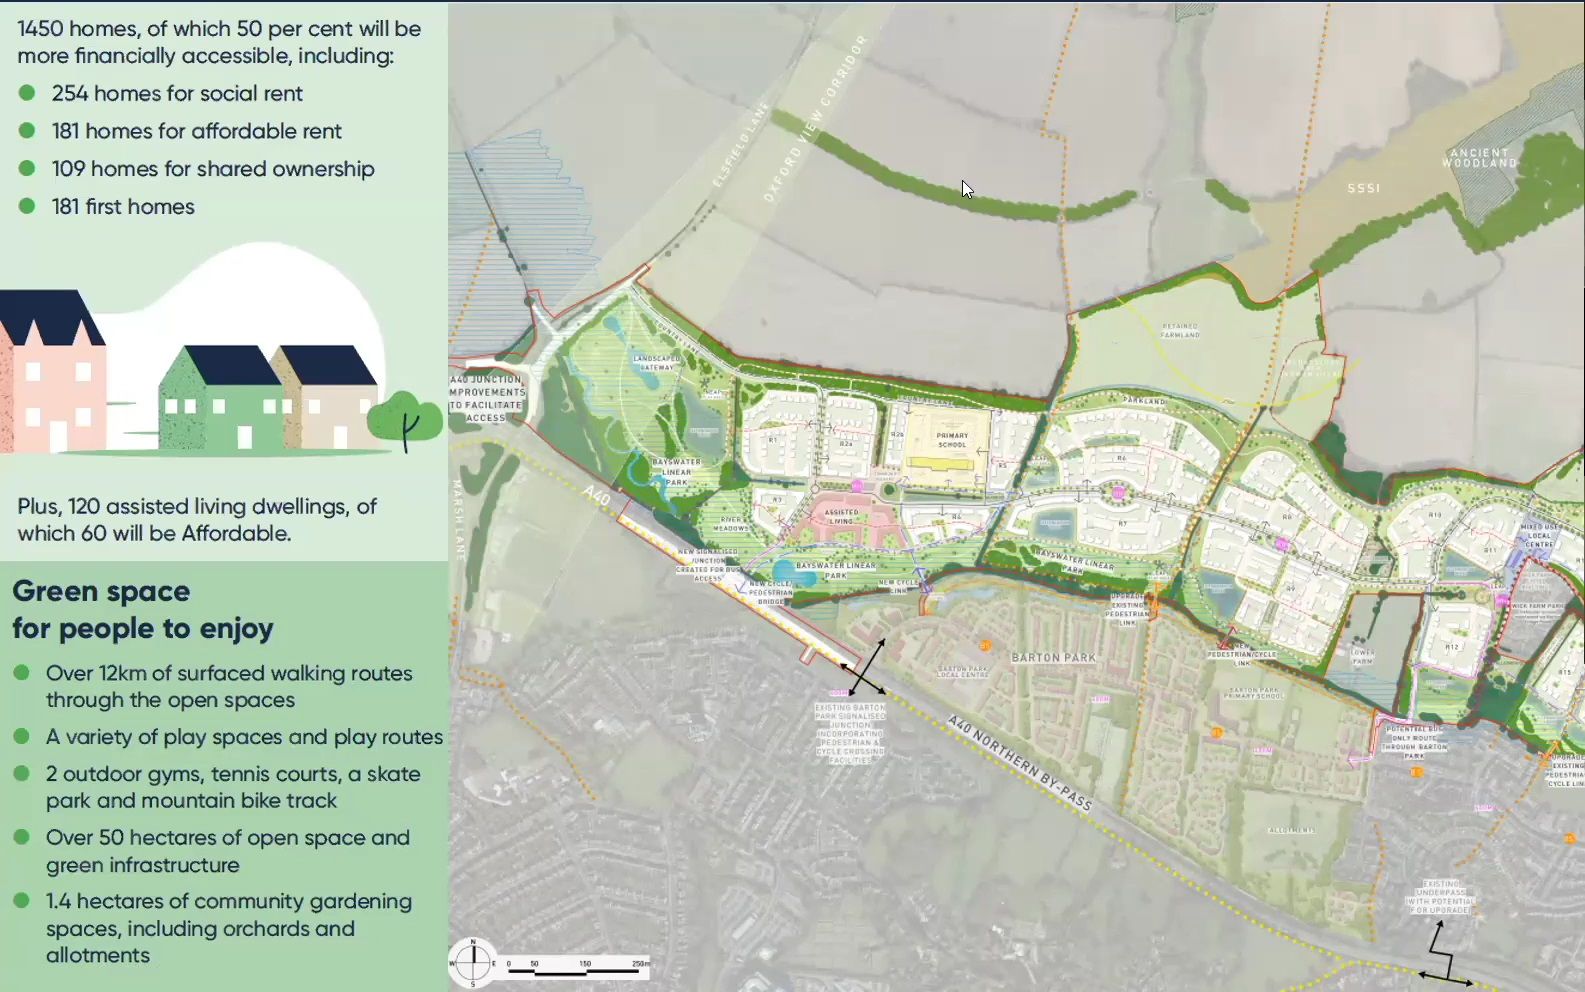 Map of the Bayswater development with details of the homes, green spaces and amenities proposed